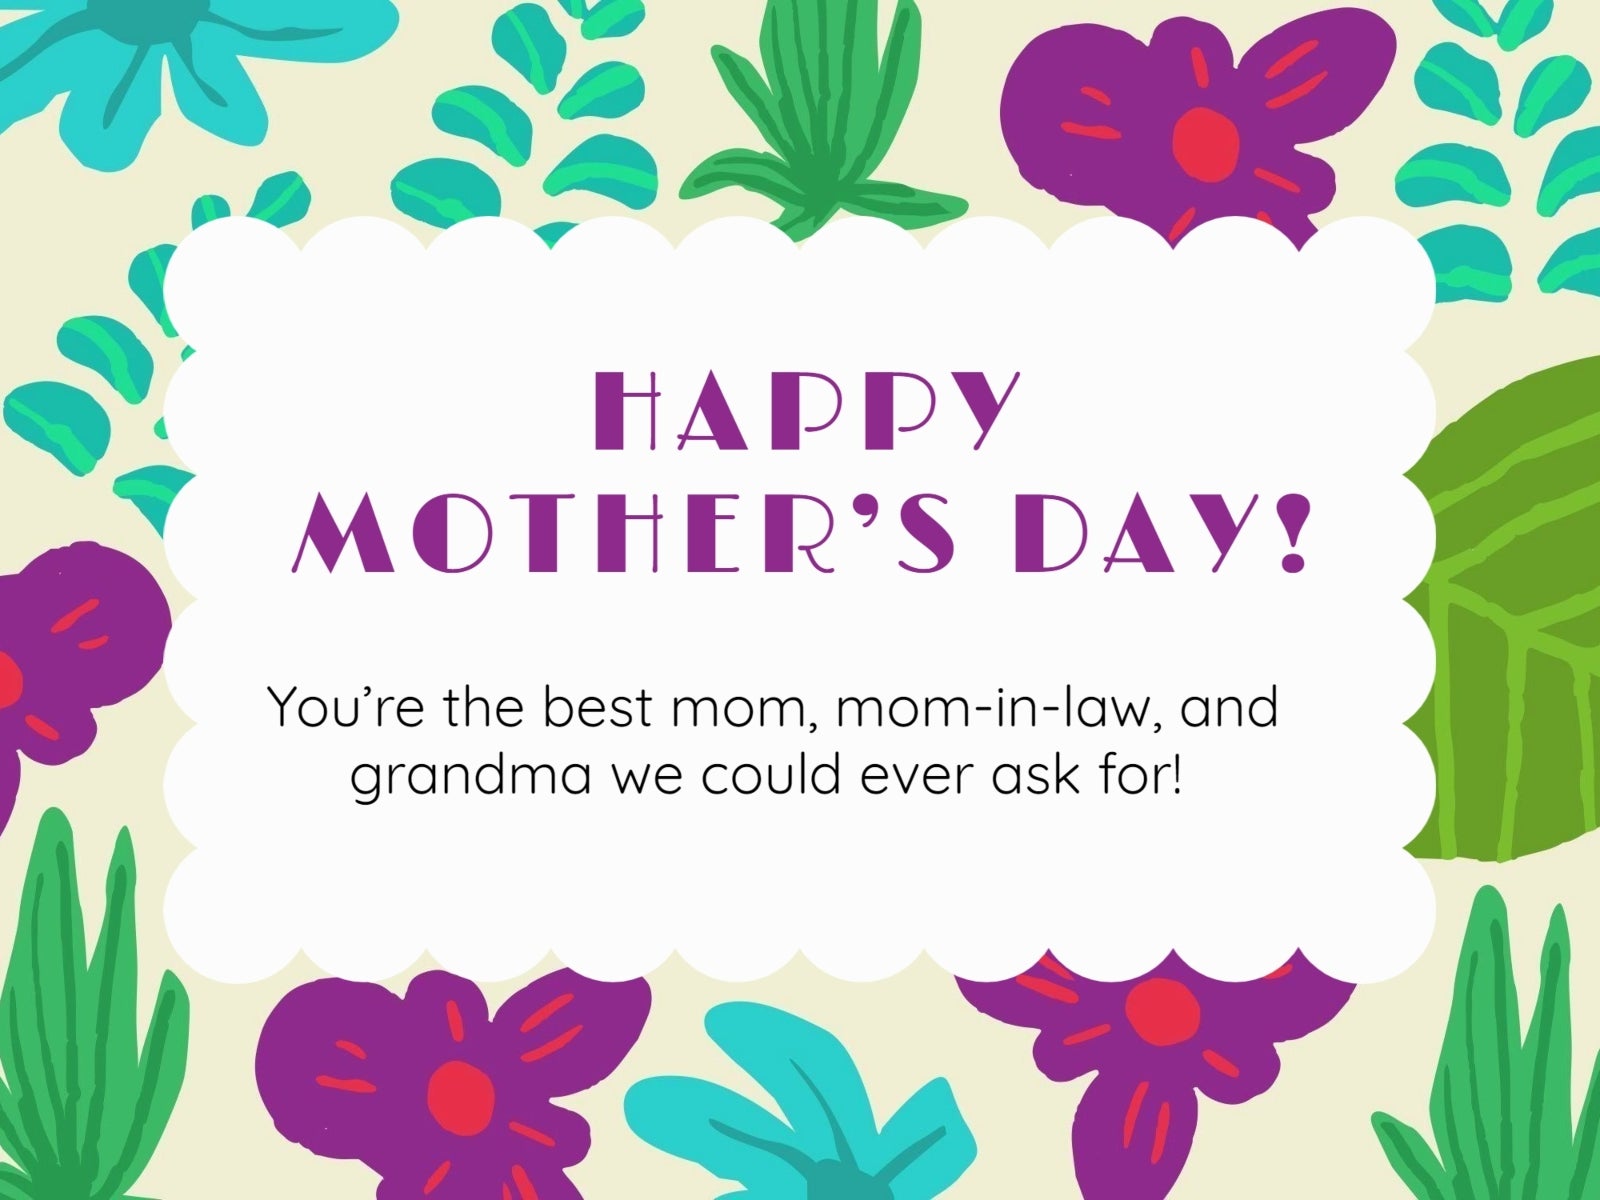 barbara gilstrap recommends stepmom mothers day quotes pic